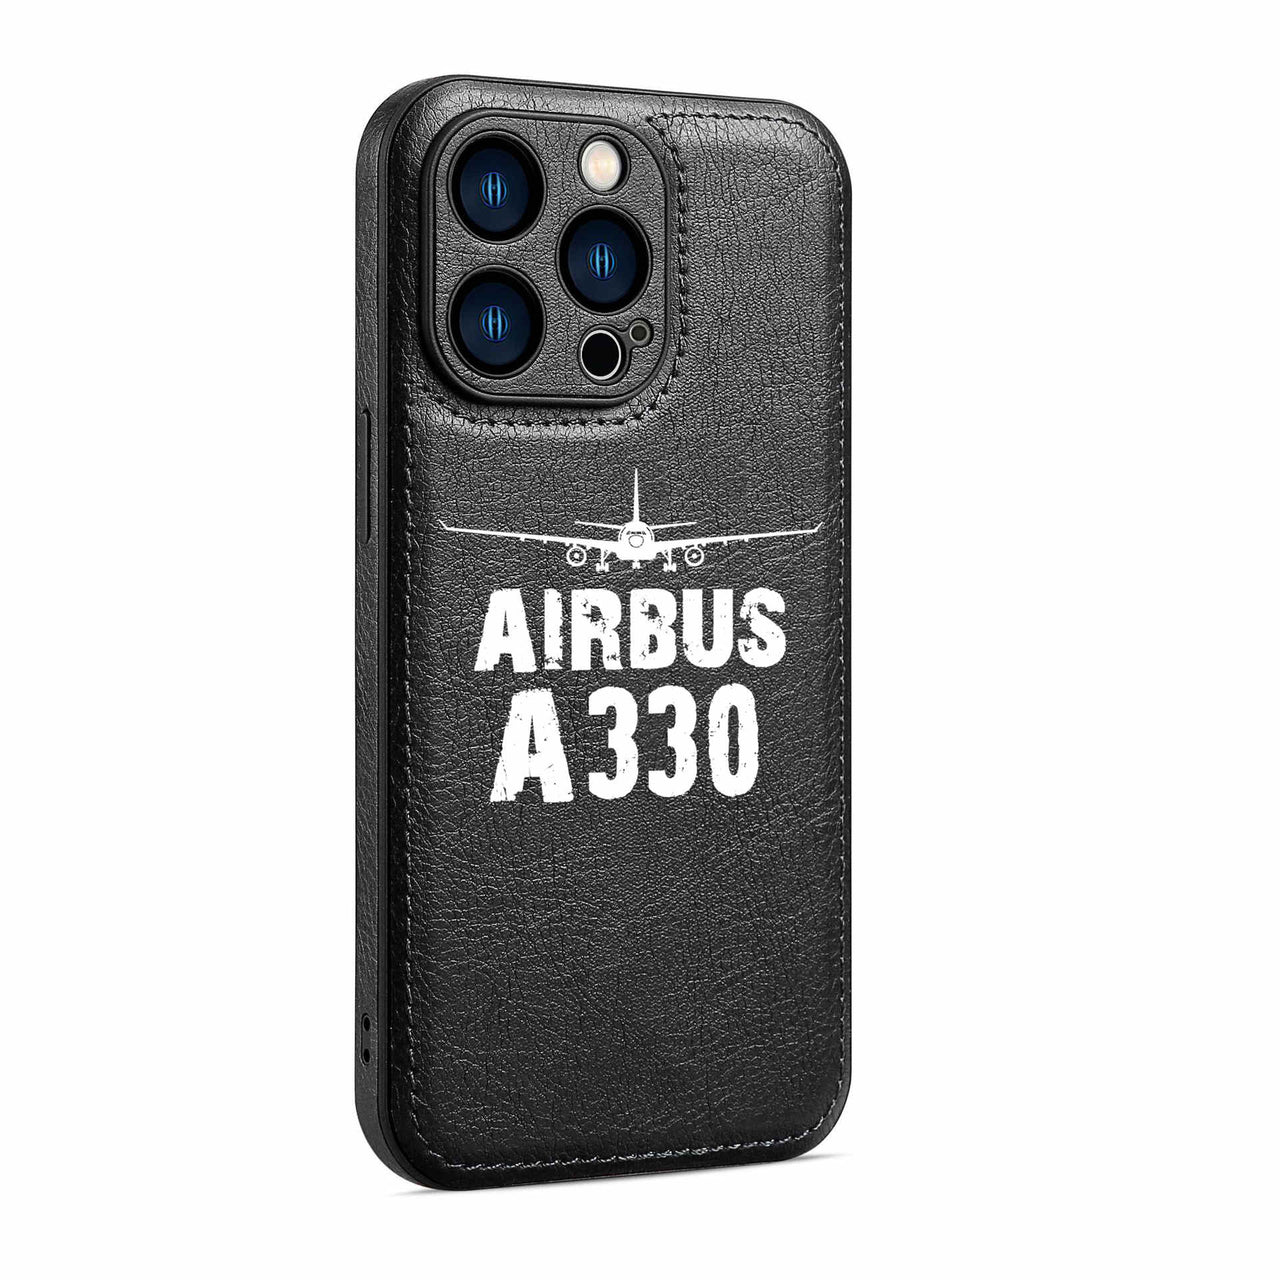 Airbus A330 & Plane Designed Leather iPhone Cases